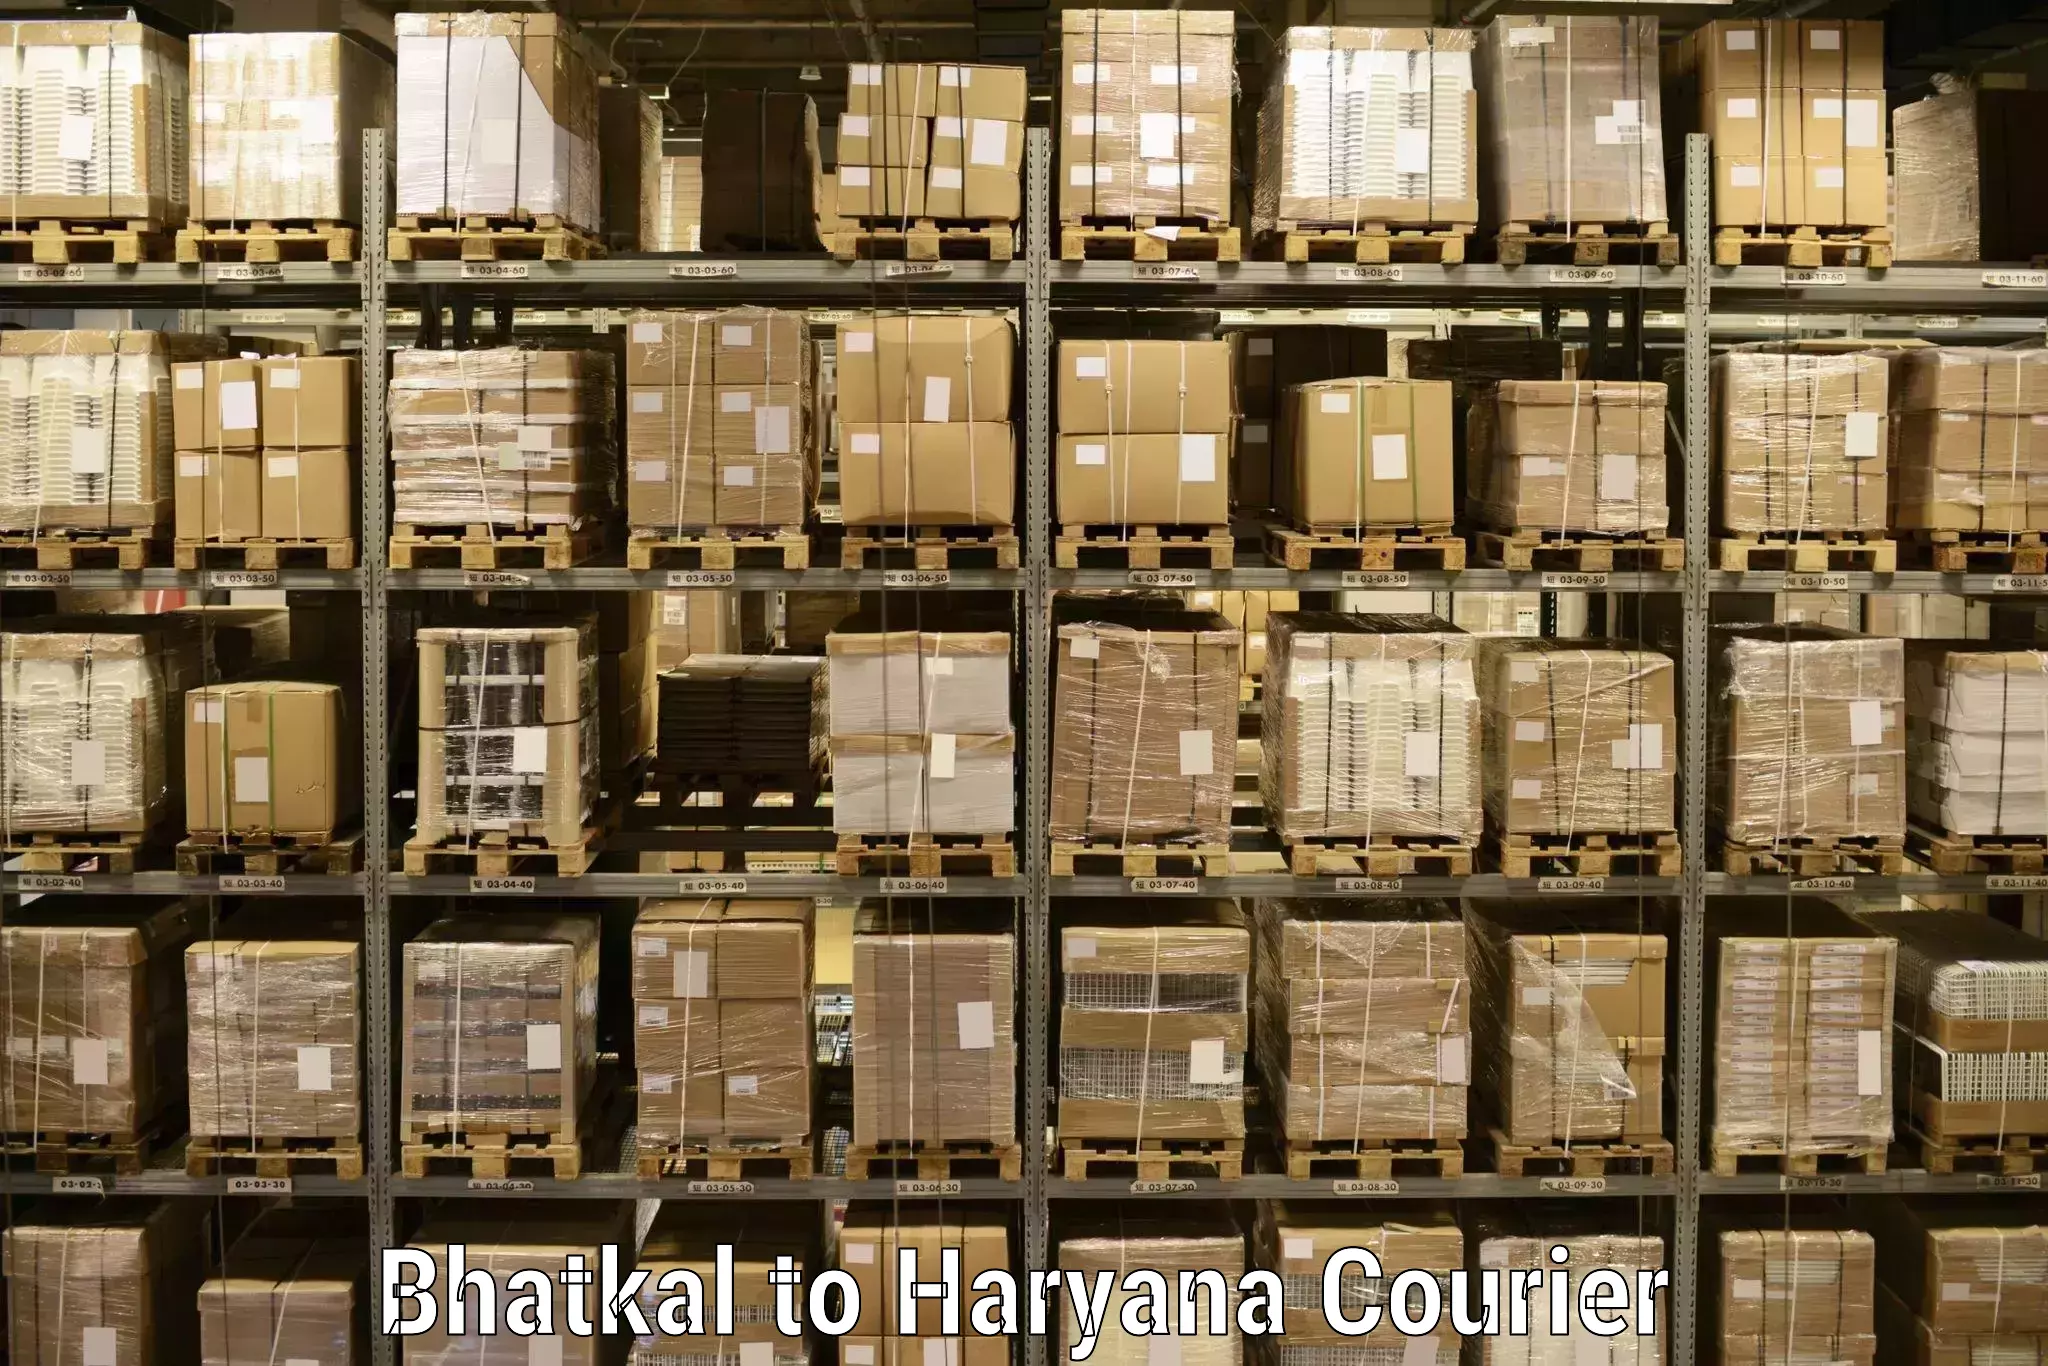 Seamless shipping experience Bhatkal to Panipat